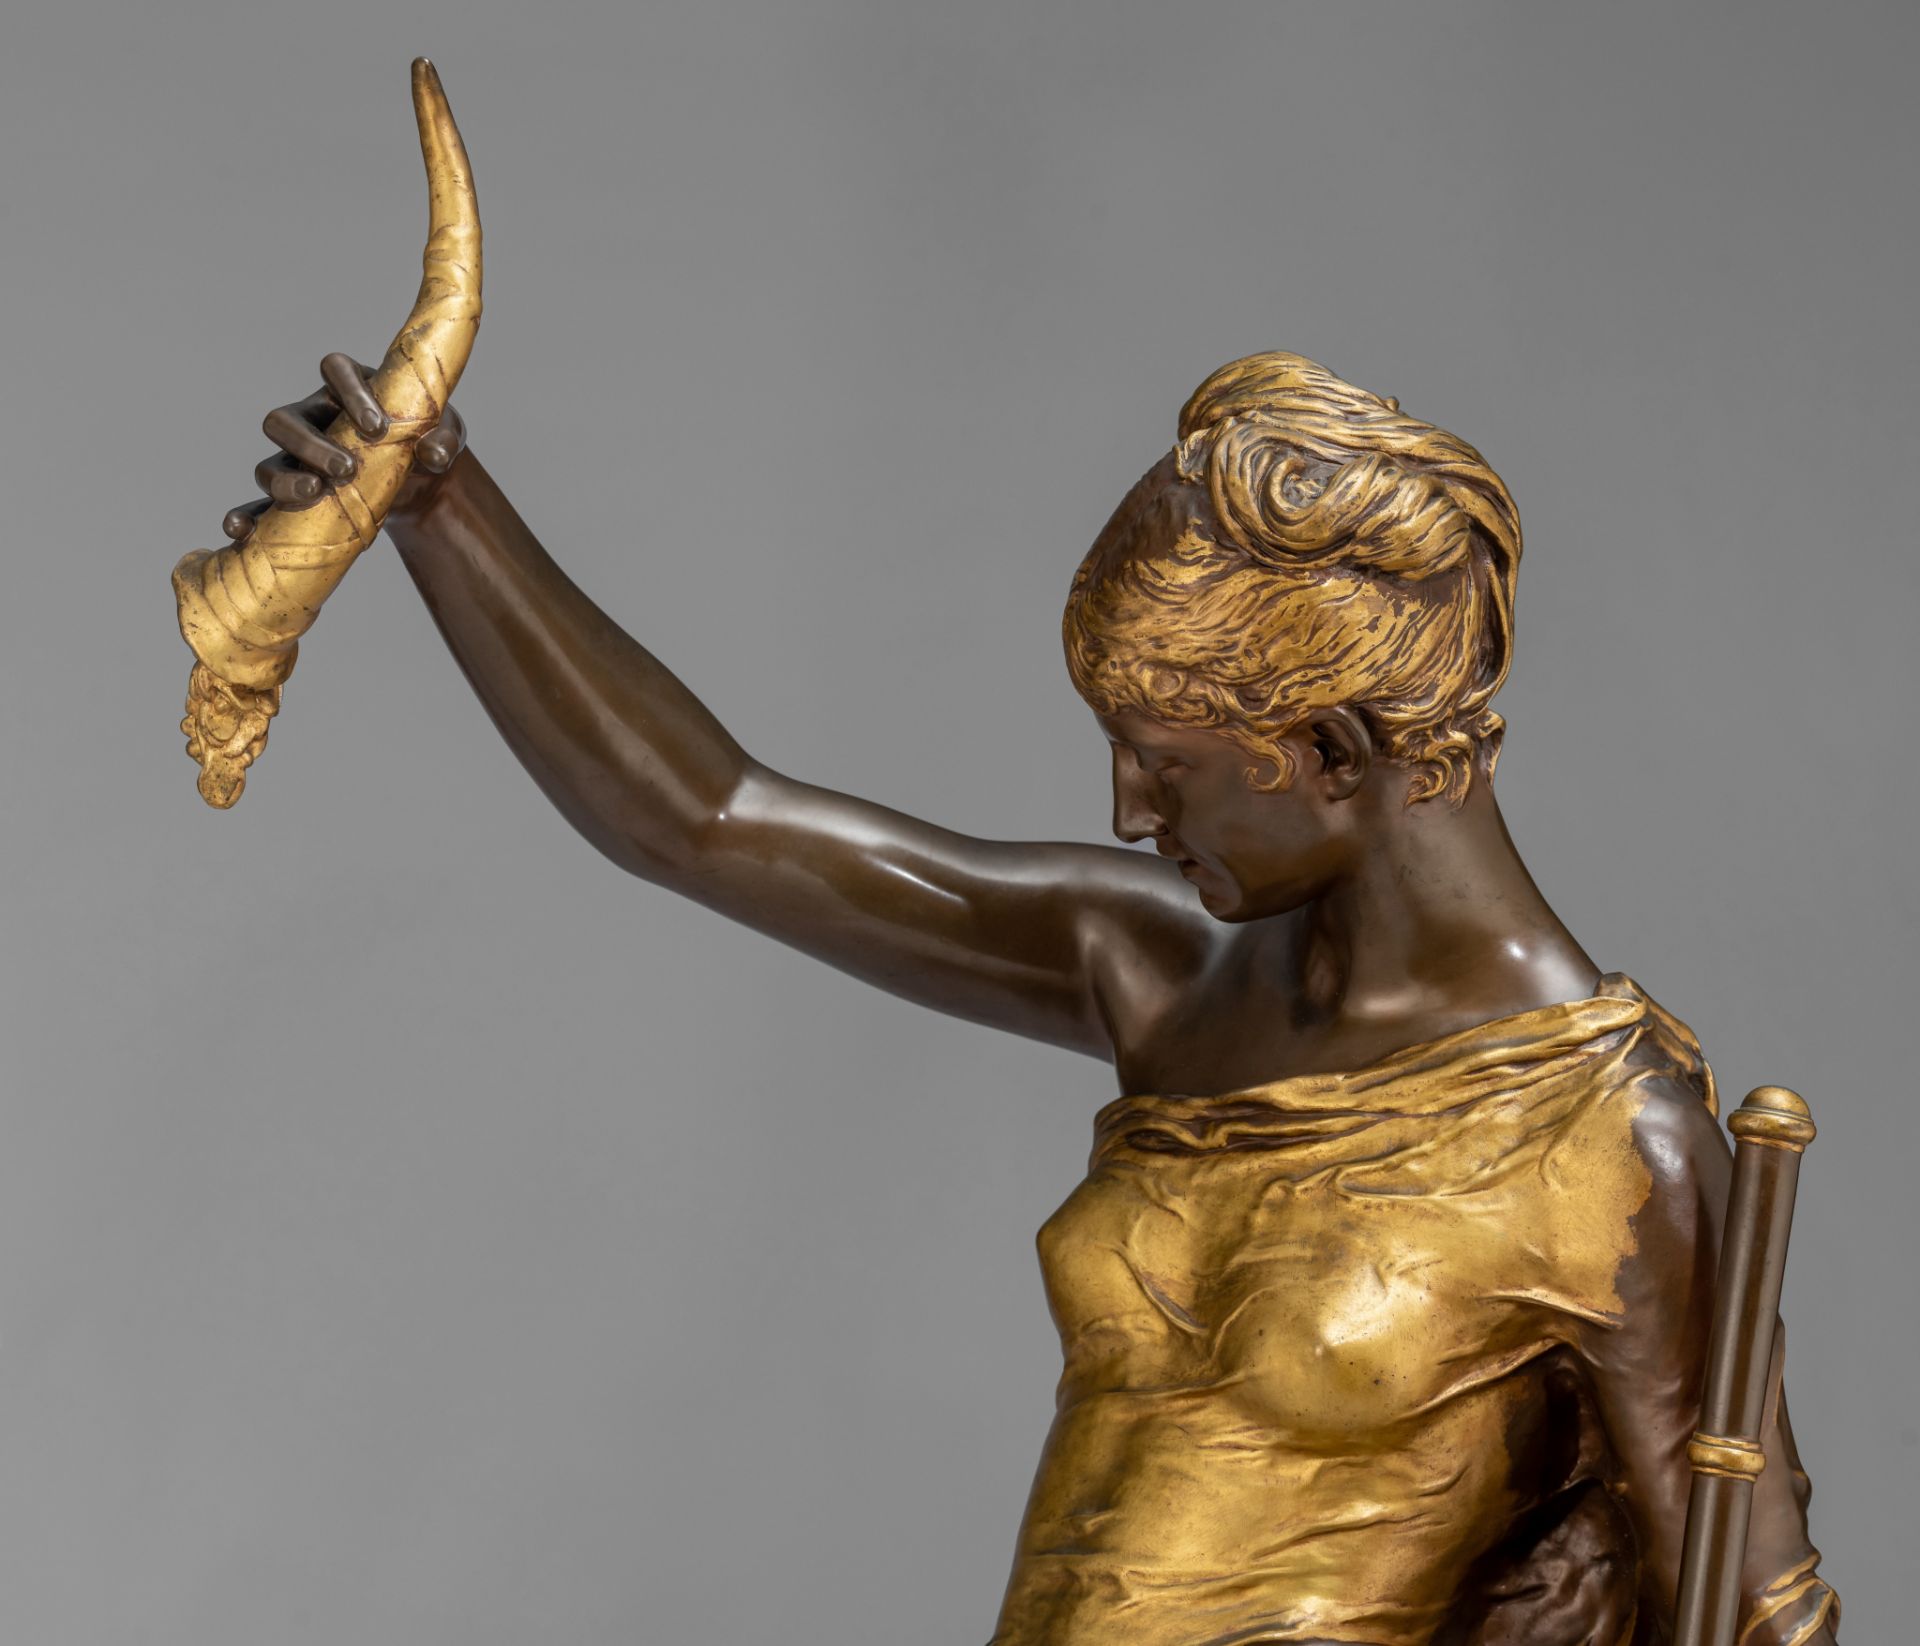 Paul Moreau-Vauthier (1871-1936), 'Fortuna', 1878, gilt and patinated bronze on a matching pedestal, - Image 11 of 14